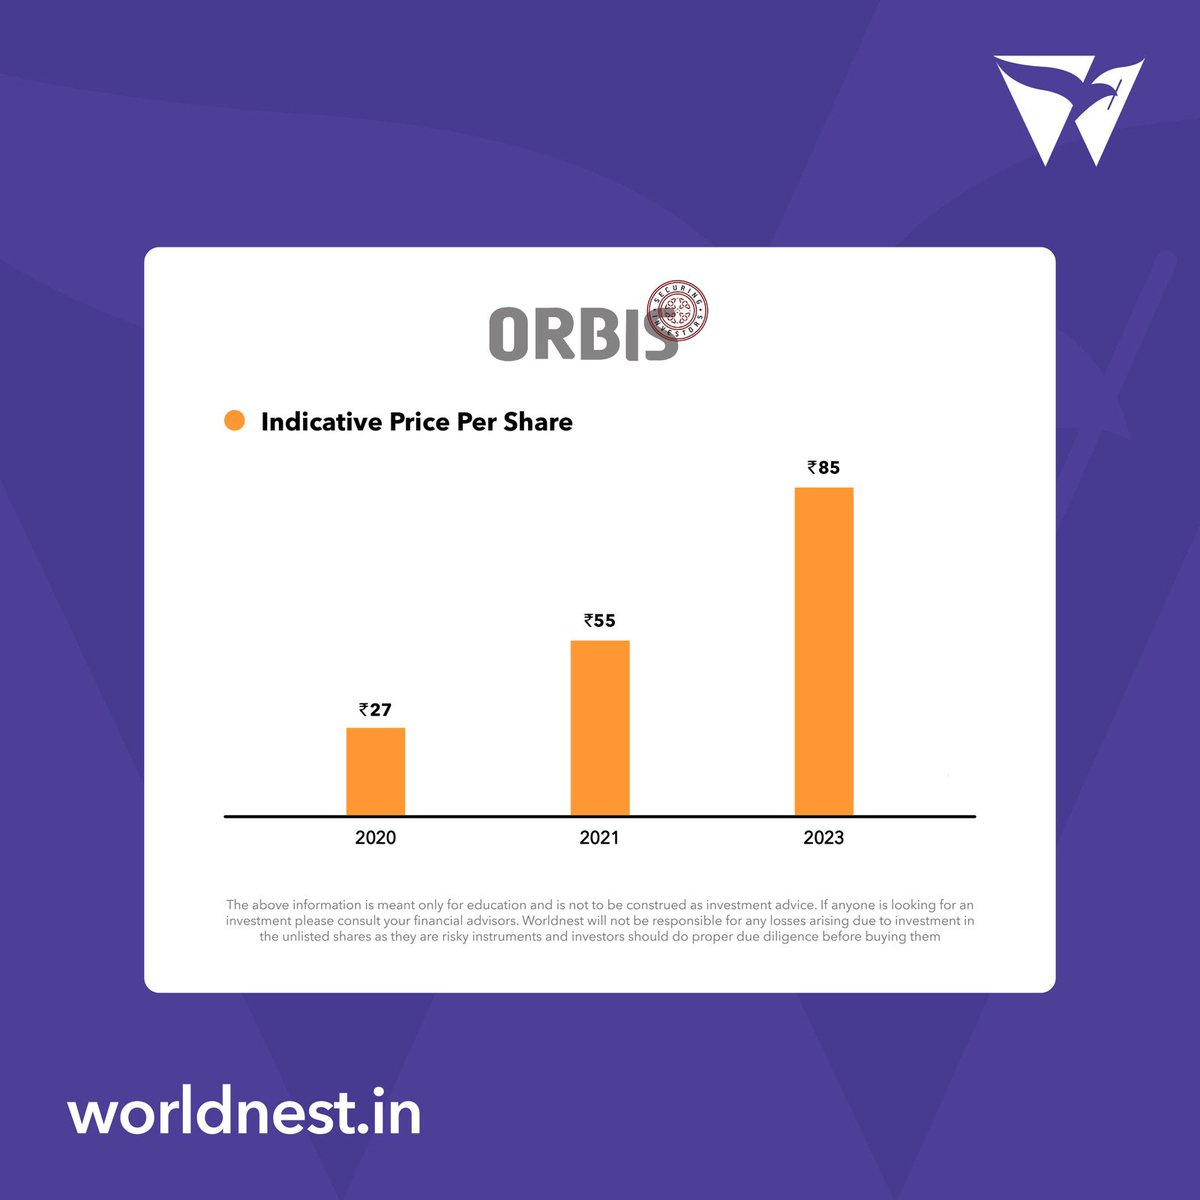 Be a part of the high-growth story of Orbis Financial Corporation Limited.

Connect with us for further information @Worldnest_in 

#Orbis #Finance #PrelPO #Unlisted #Growth
#ProfitableCompanies #GrowthCompanies #IPO #India #RelationshipsToValue 
#Investment #Investors #Trading